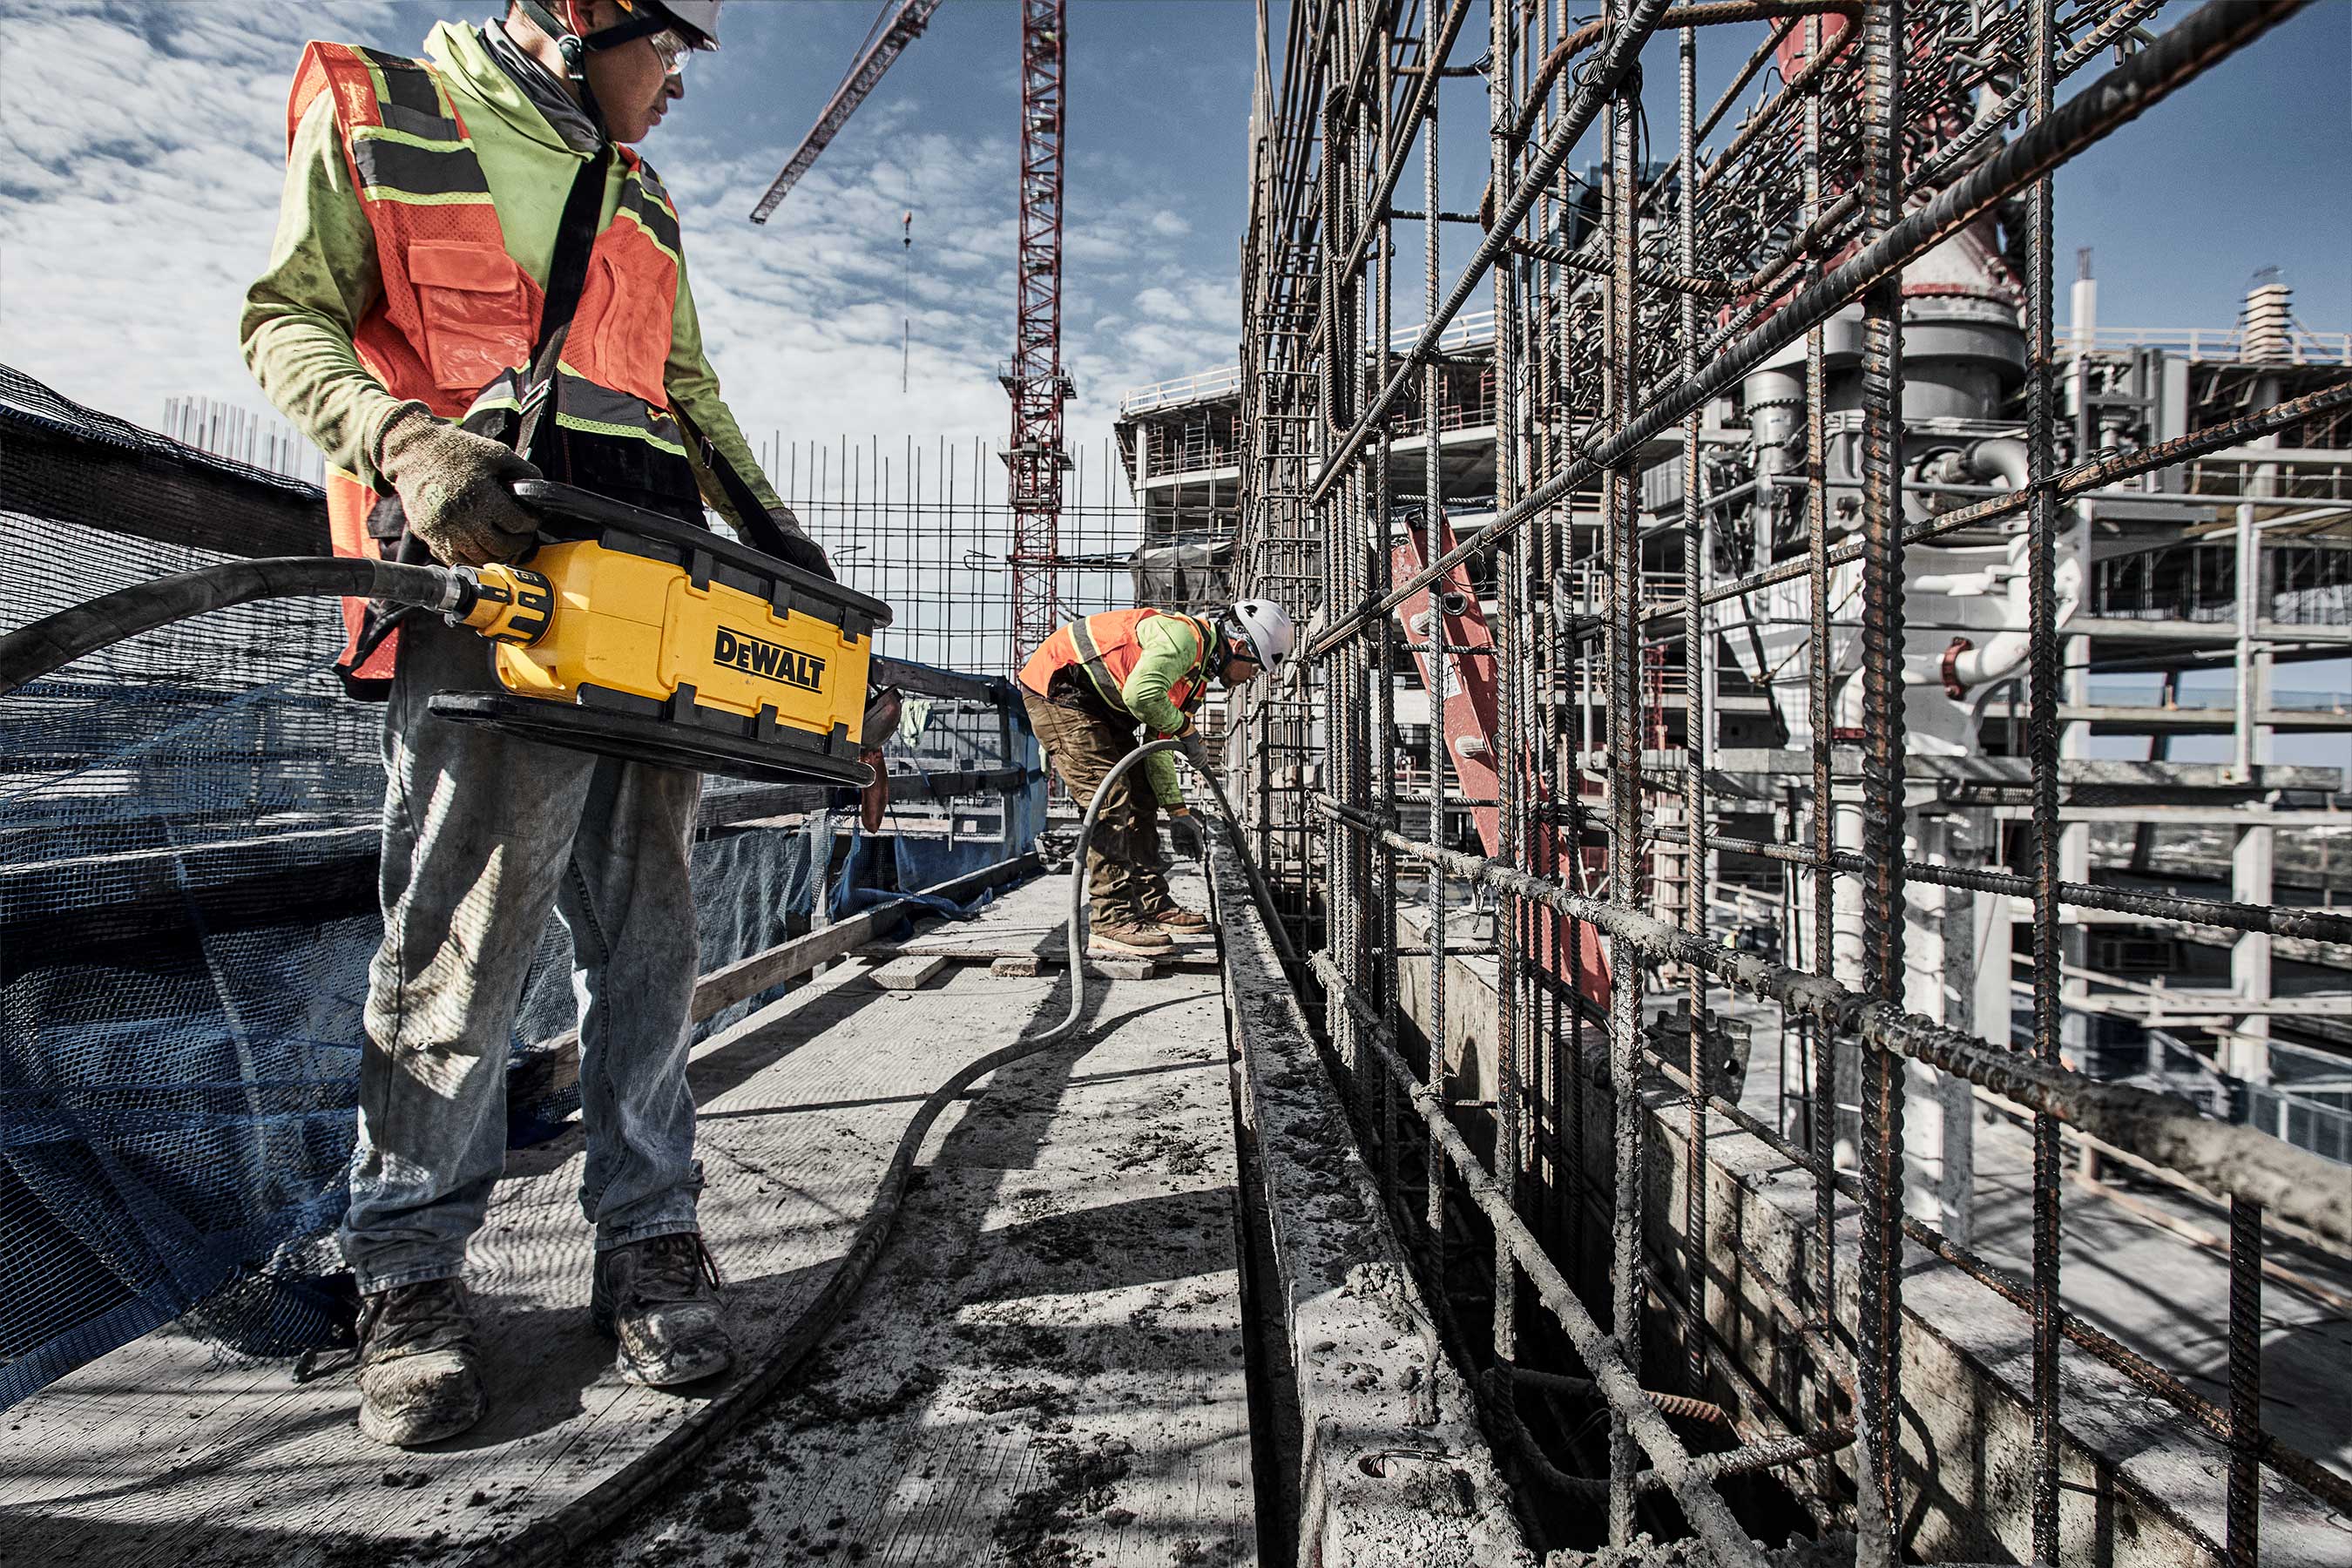 The DEWALT POWERSHIFT™ Powerpack can be activated remotely through wireless tool control and carried with an over-body high-vis harness for easy transport.